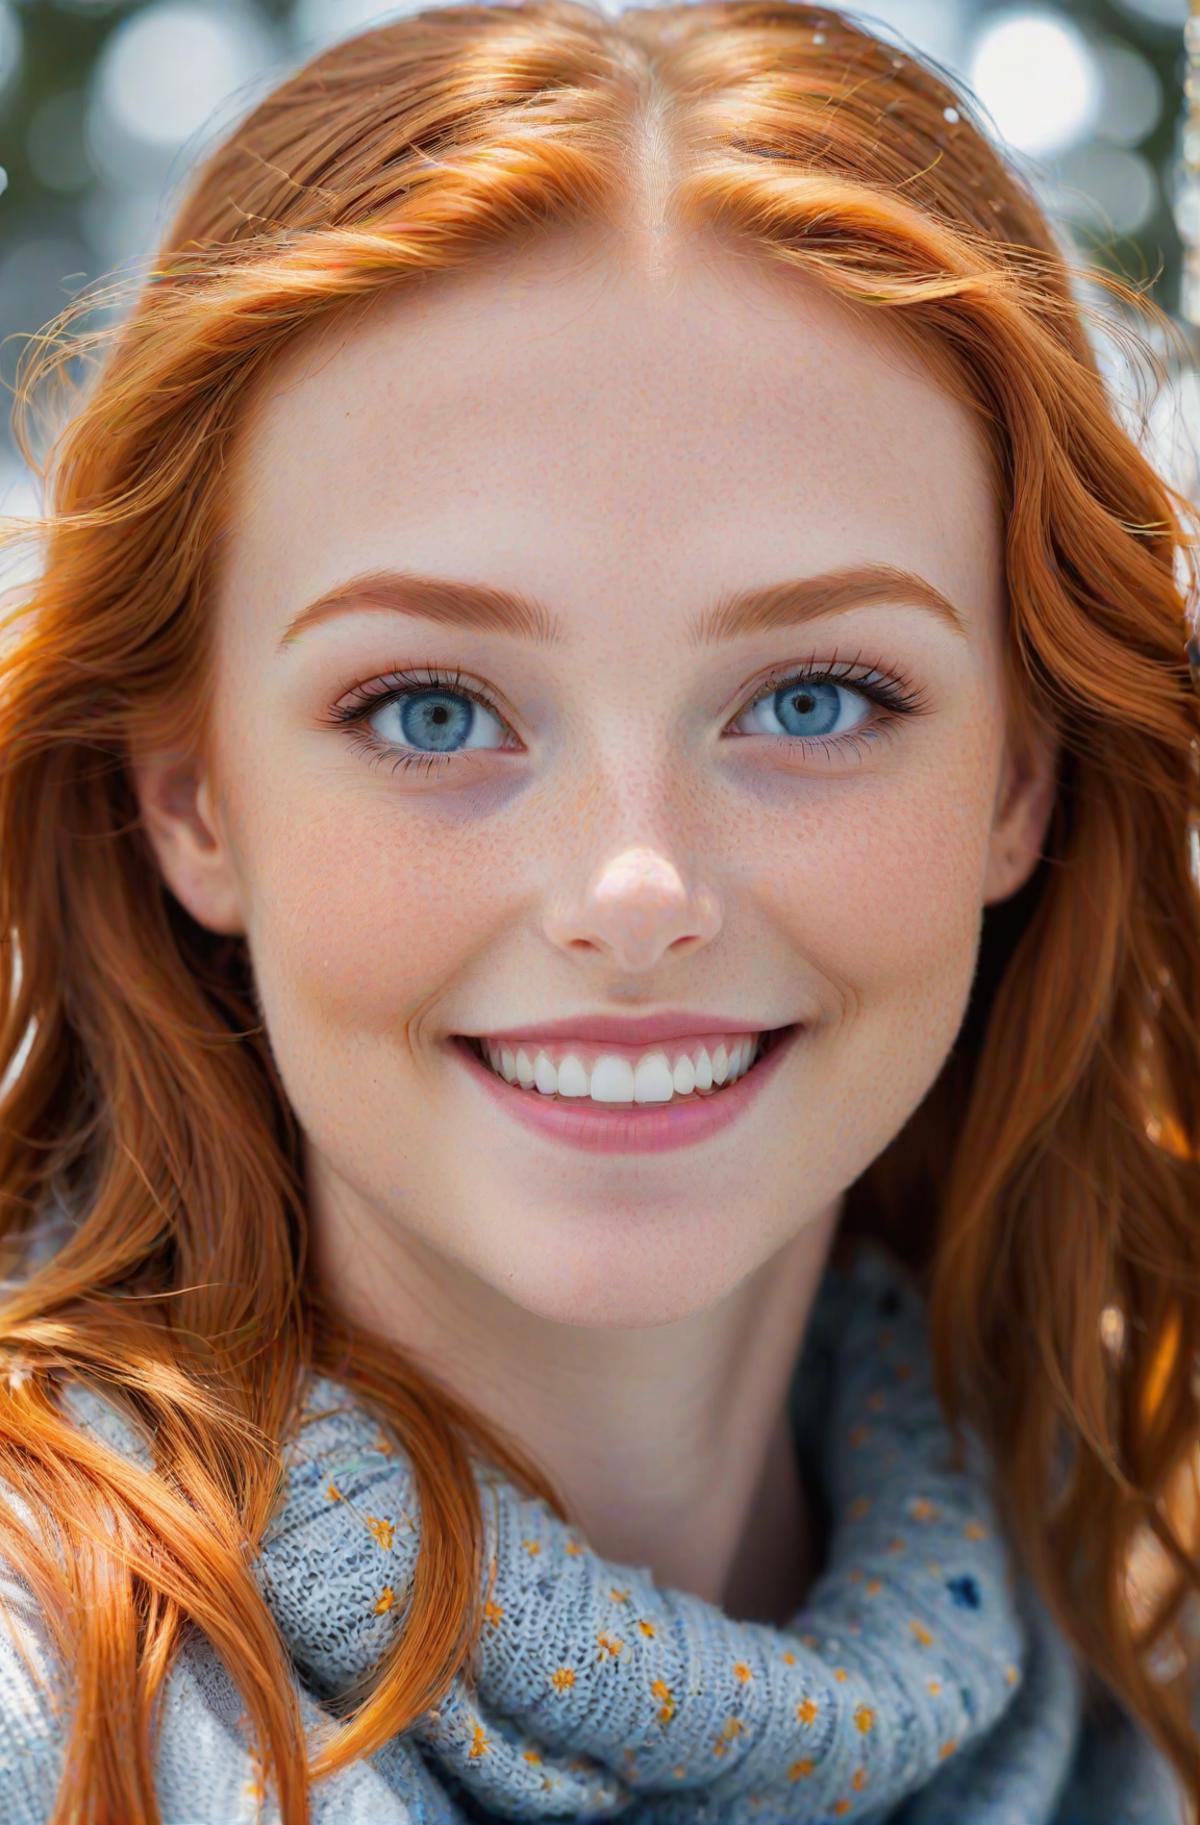 A smiling, pretty young woman with blue eyes and red hair.